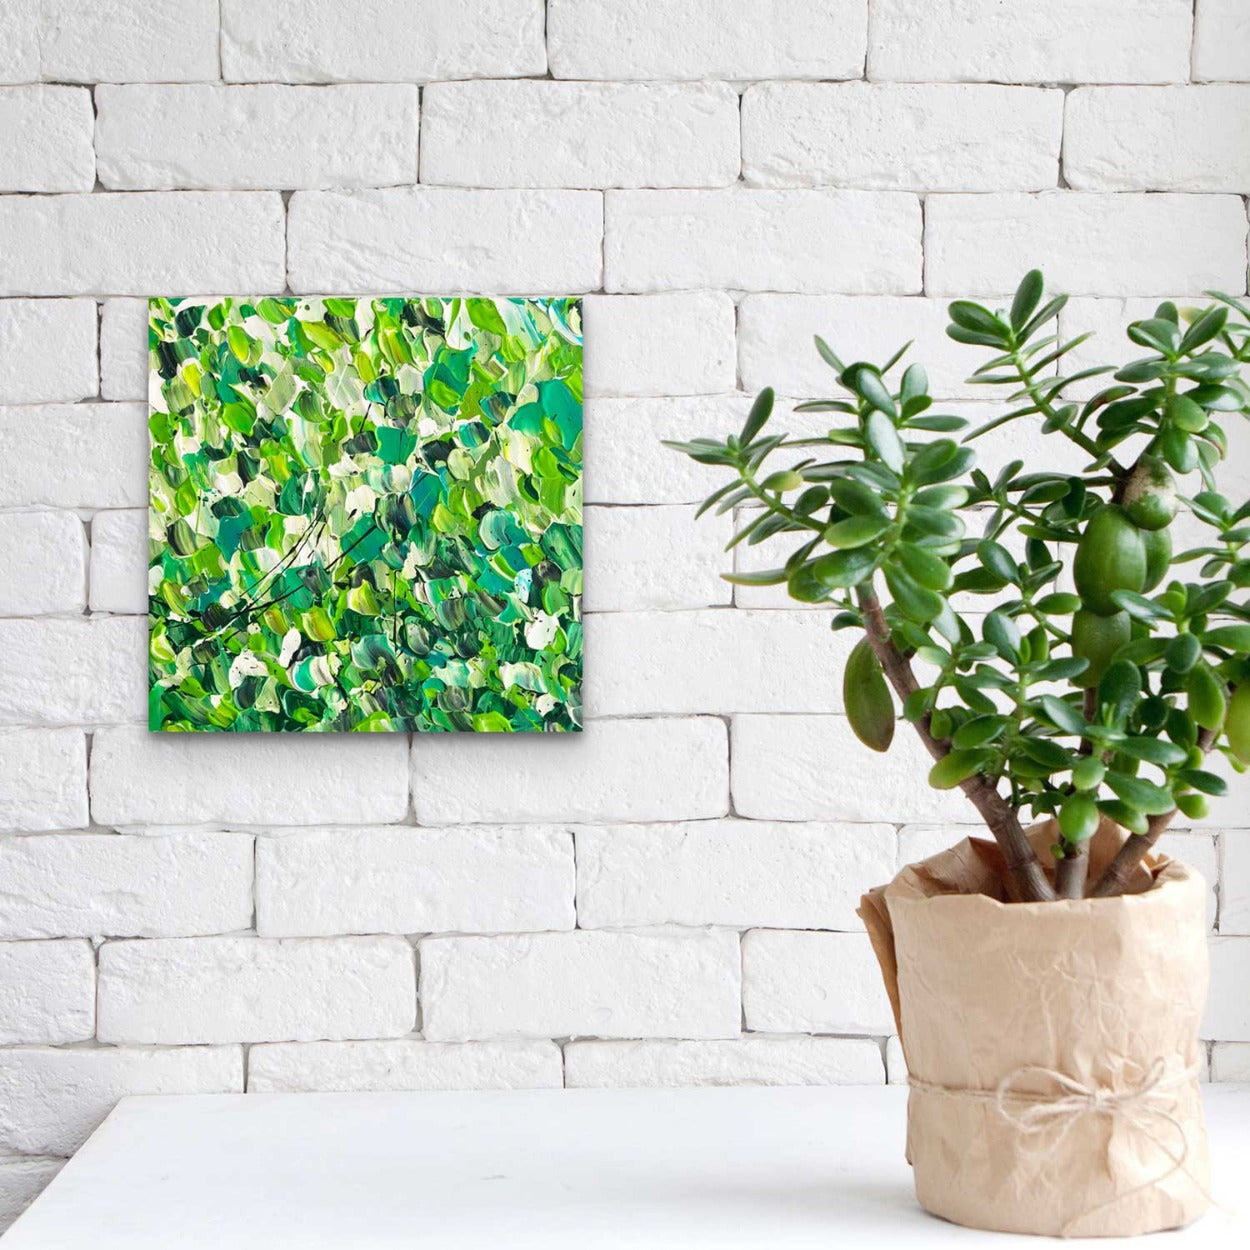 Fields of Green original , textured abstract canvas wall art against white brick wall near pot plant. Painted by Bridget Bradley